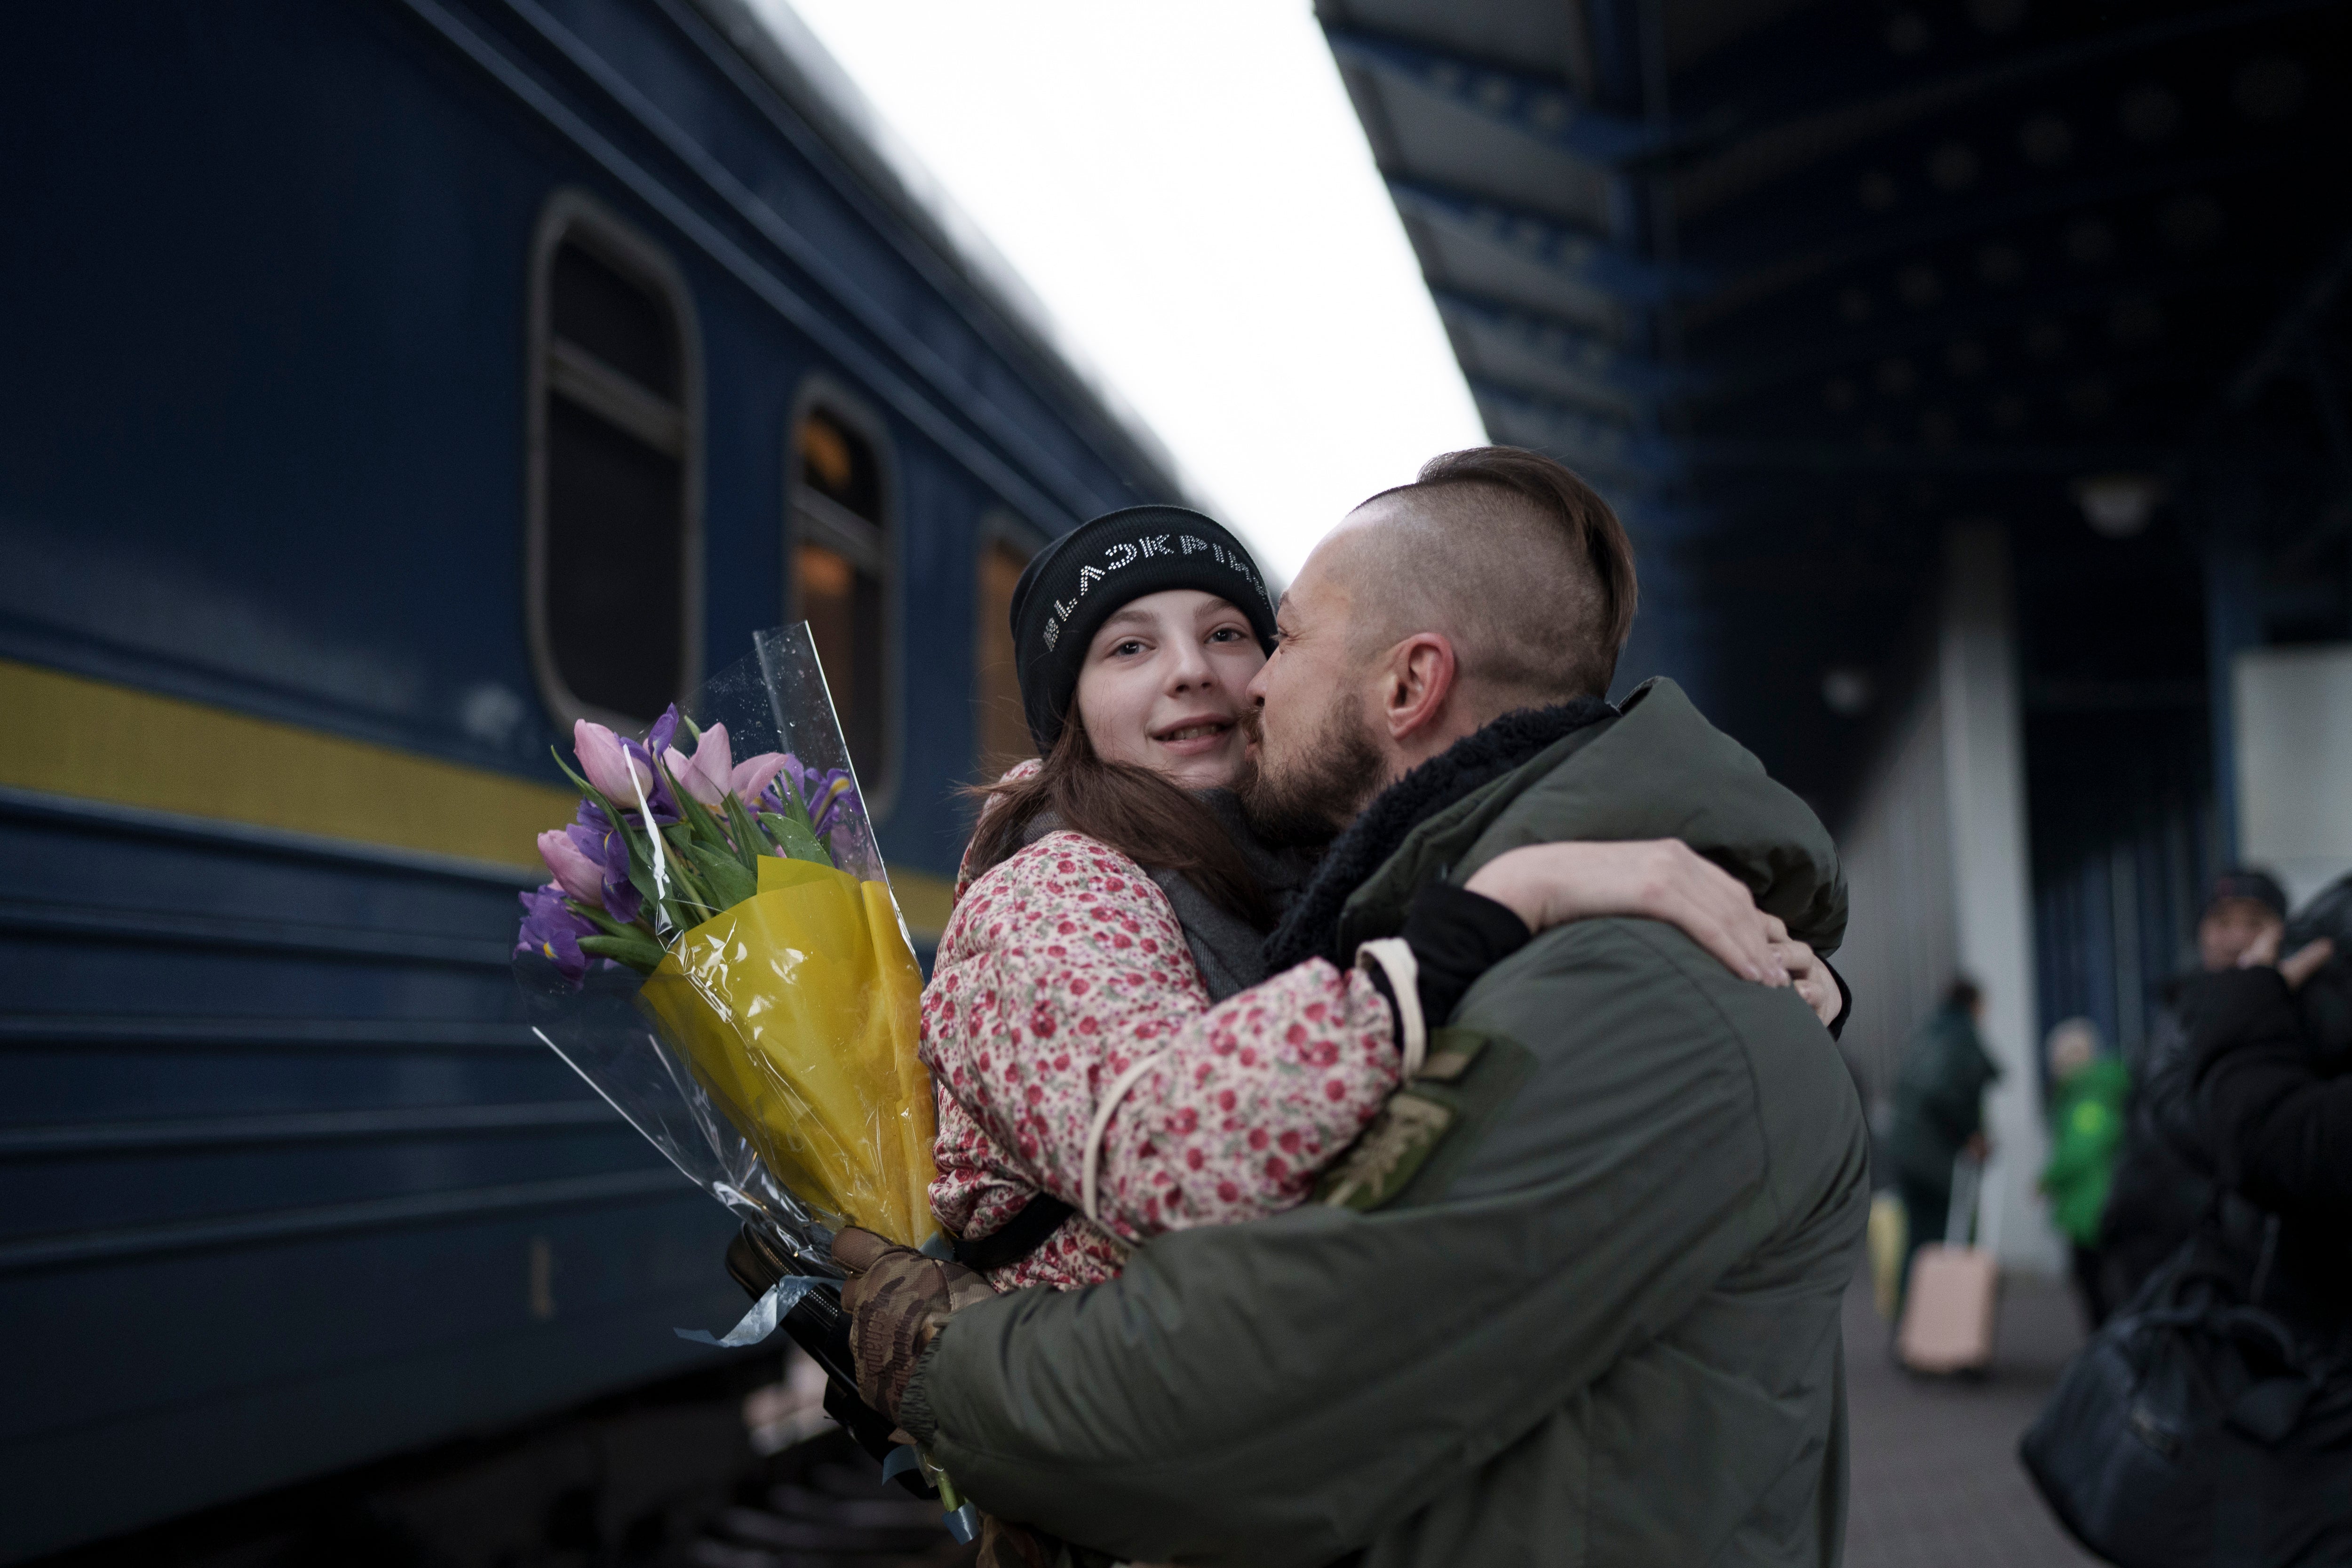 Ukrainian soldier Vasyl Khomko meets his daughter Yana and wife Galyna, who have been living in Slovakia due to the war but returned to Kyiv to spend New Year’s Eve together